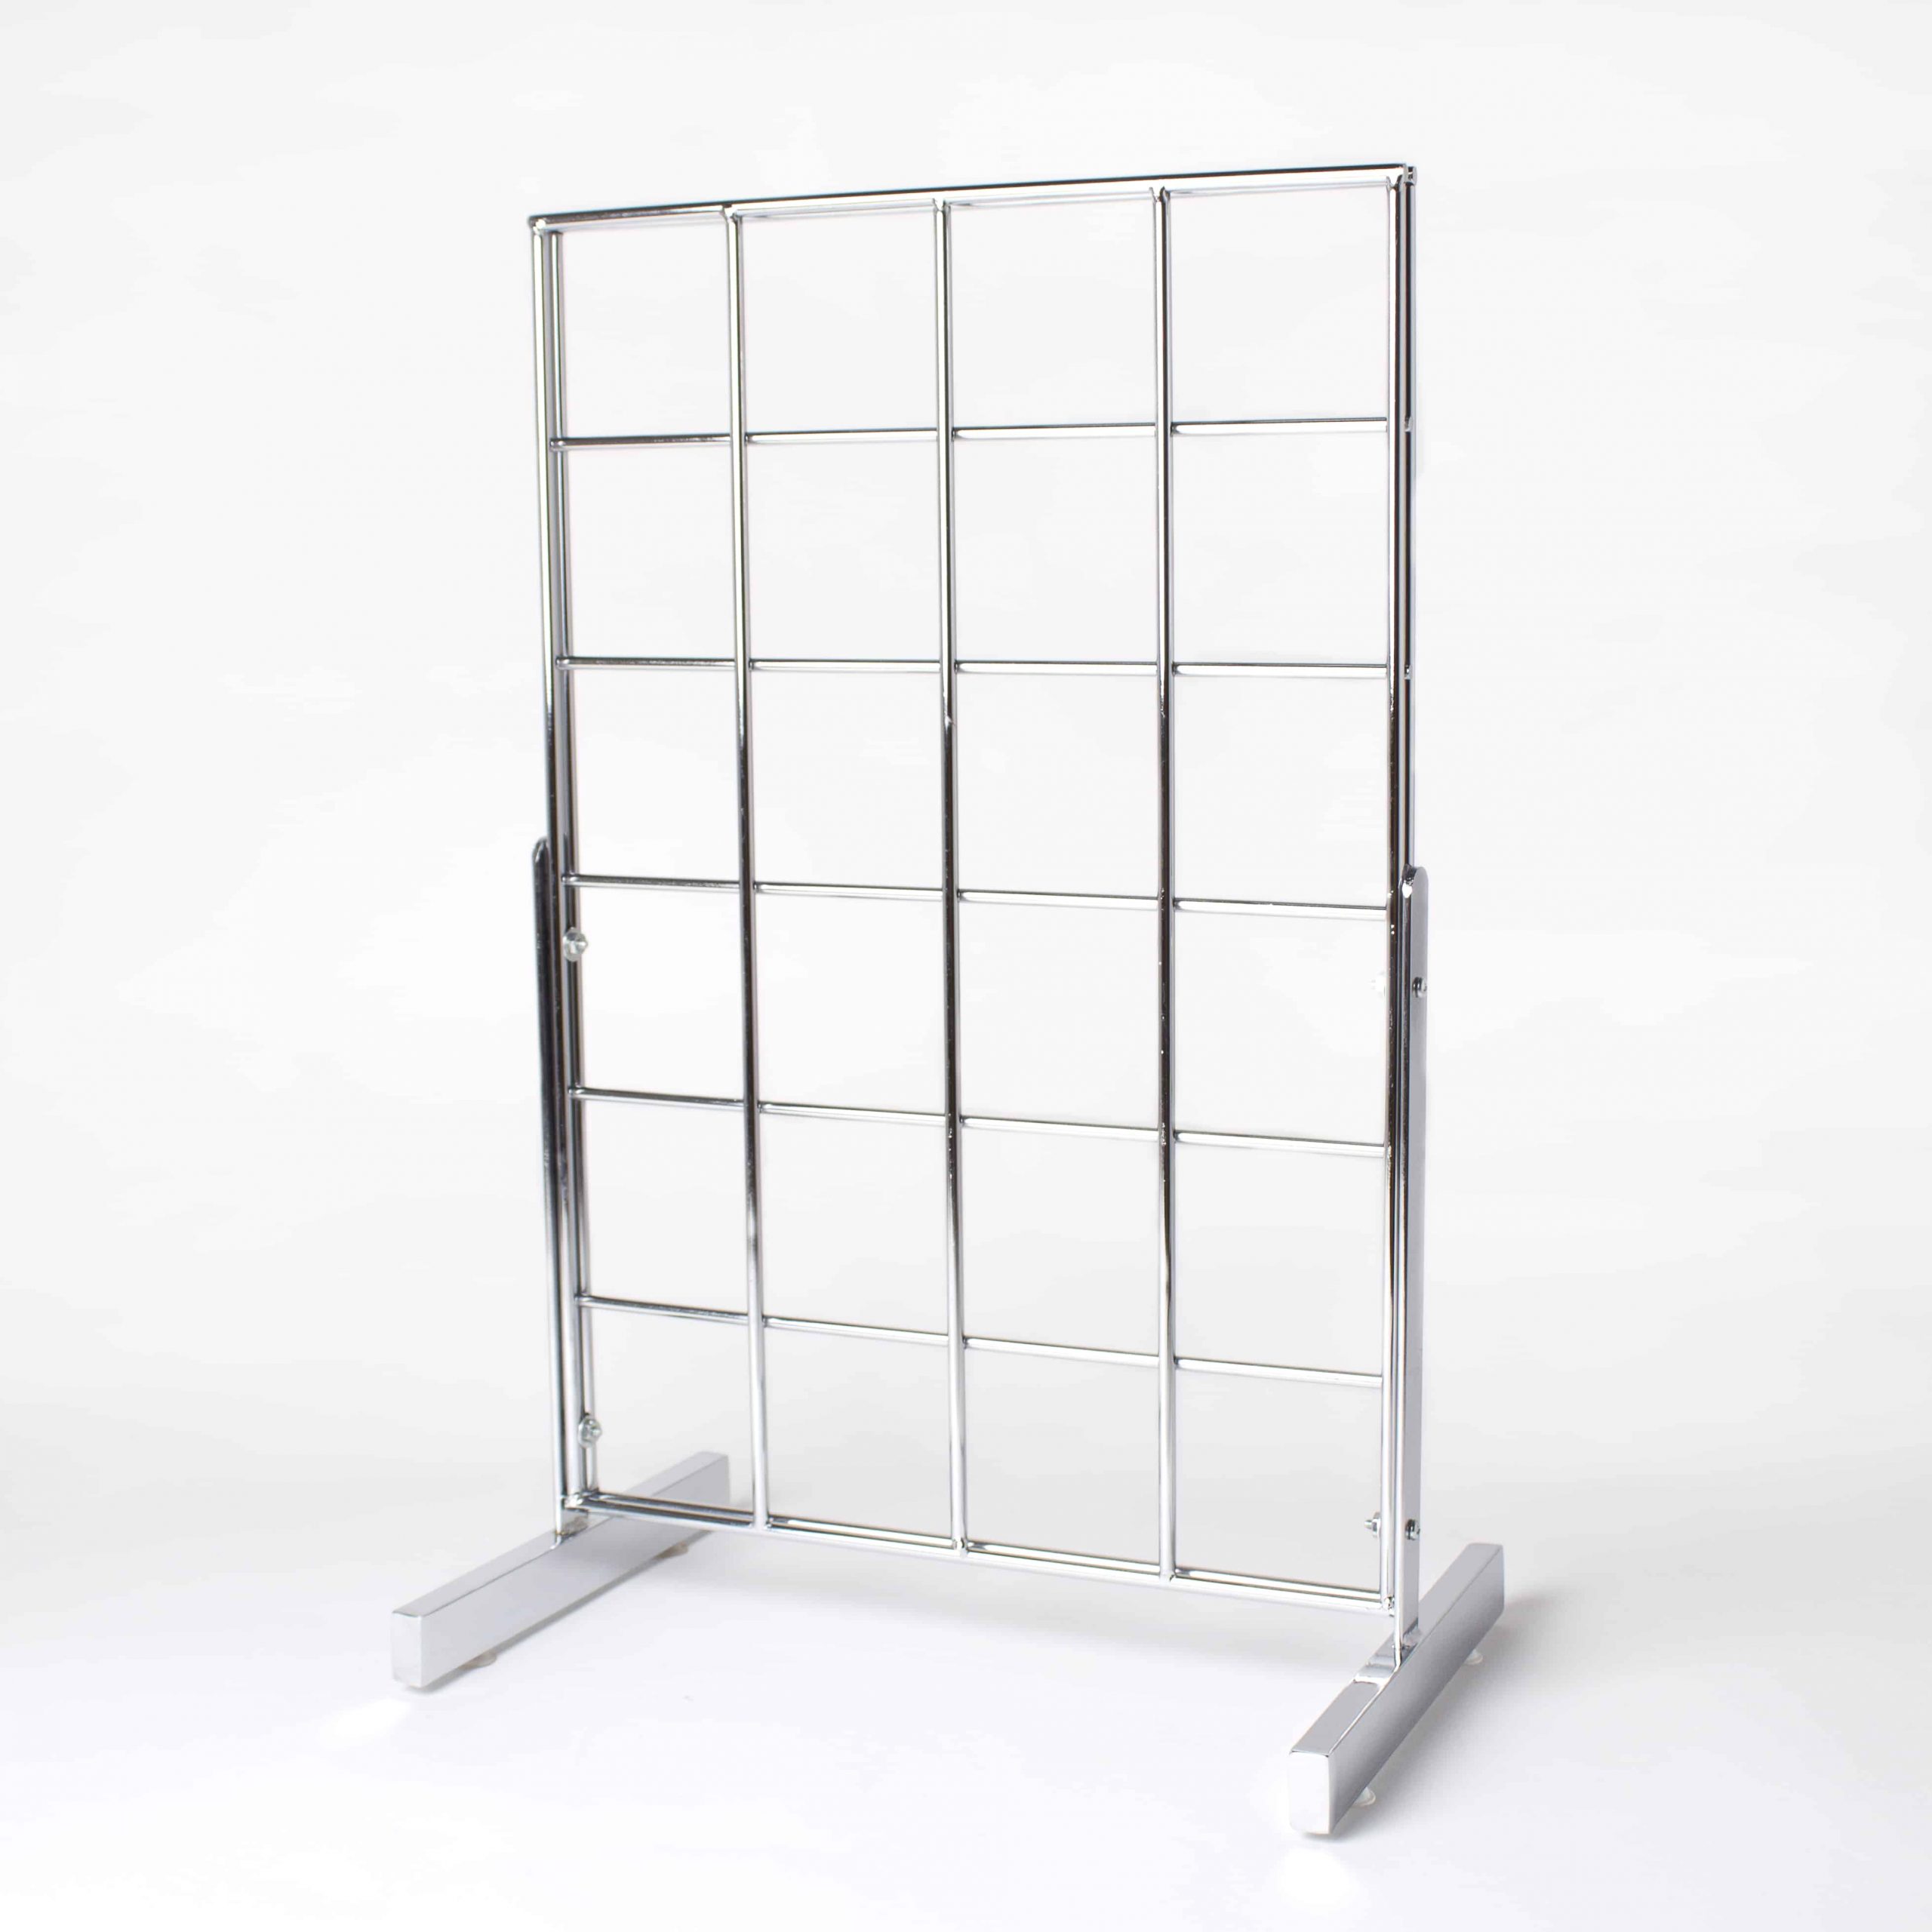 Retail shop Display. Gridwall Menu holder A6 and A7 in Landscape and Portrait 